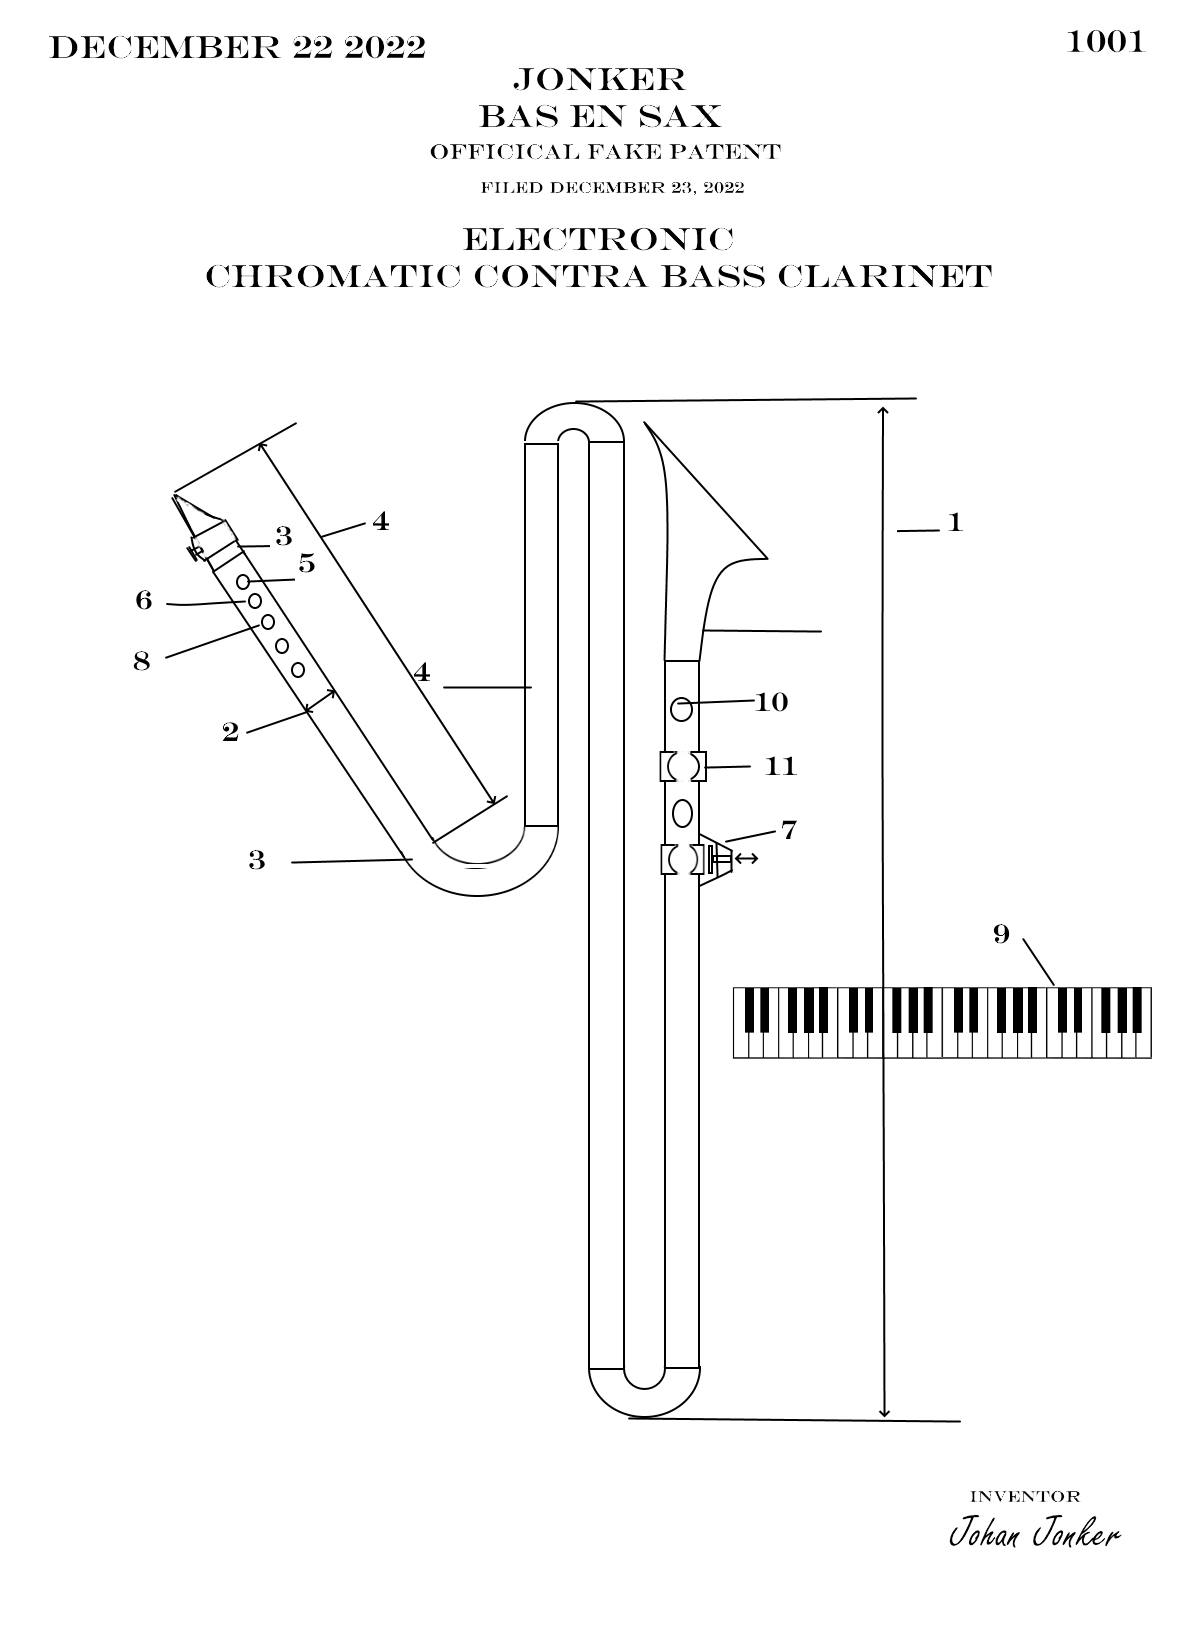 official fake patent electronica chromatic contra bass